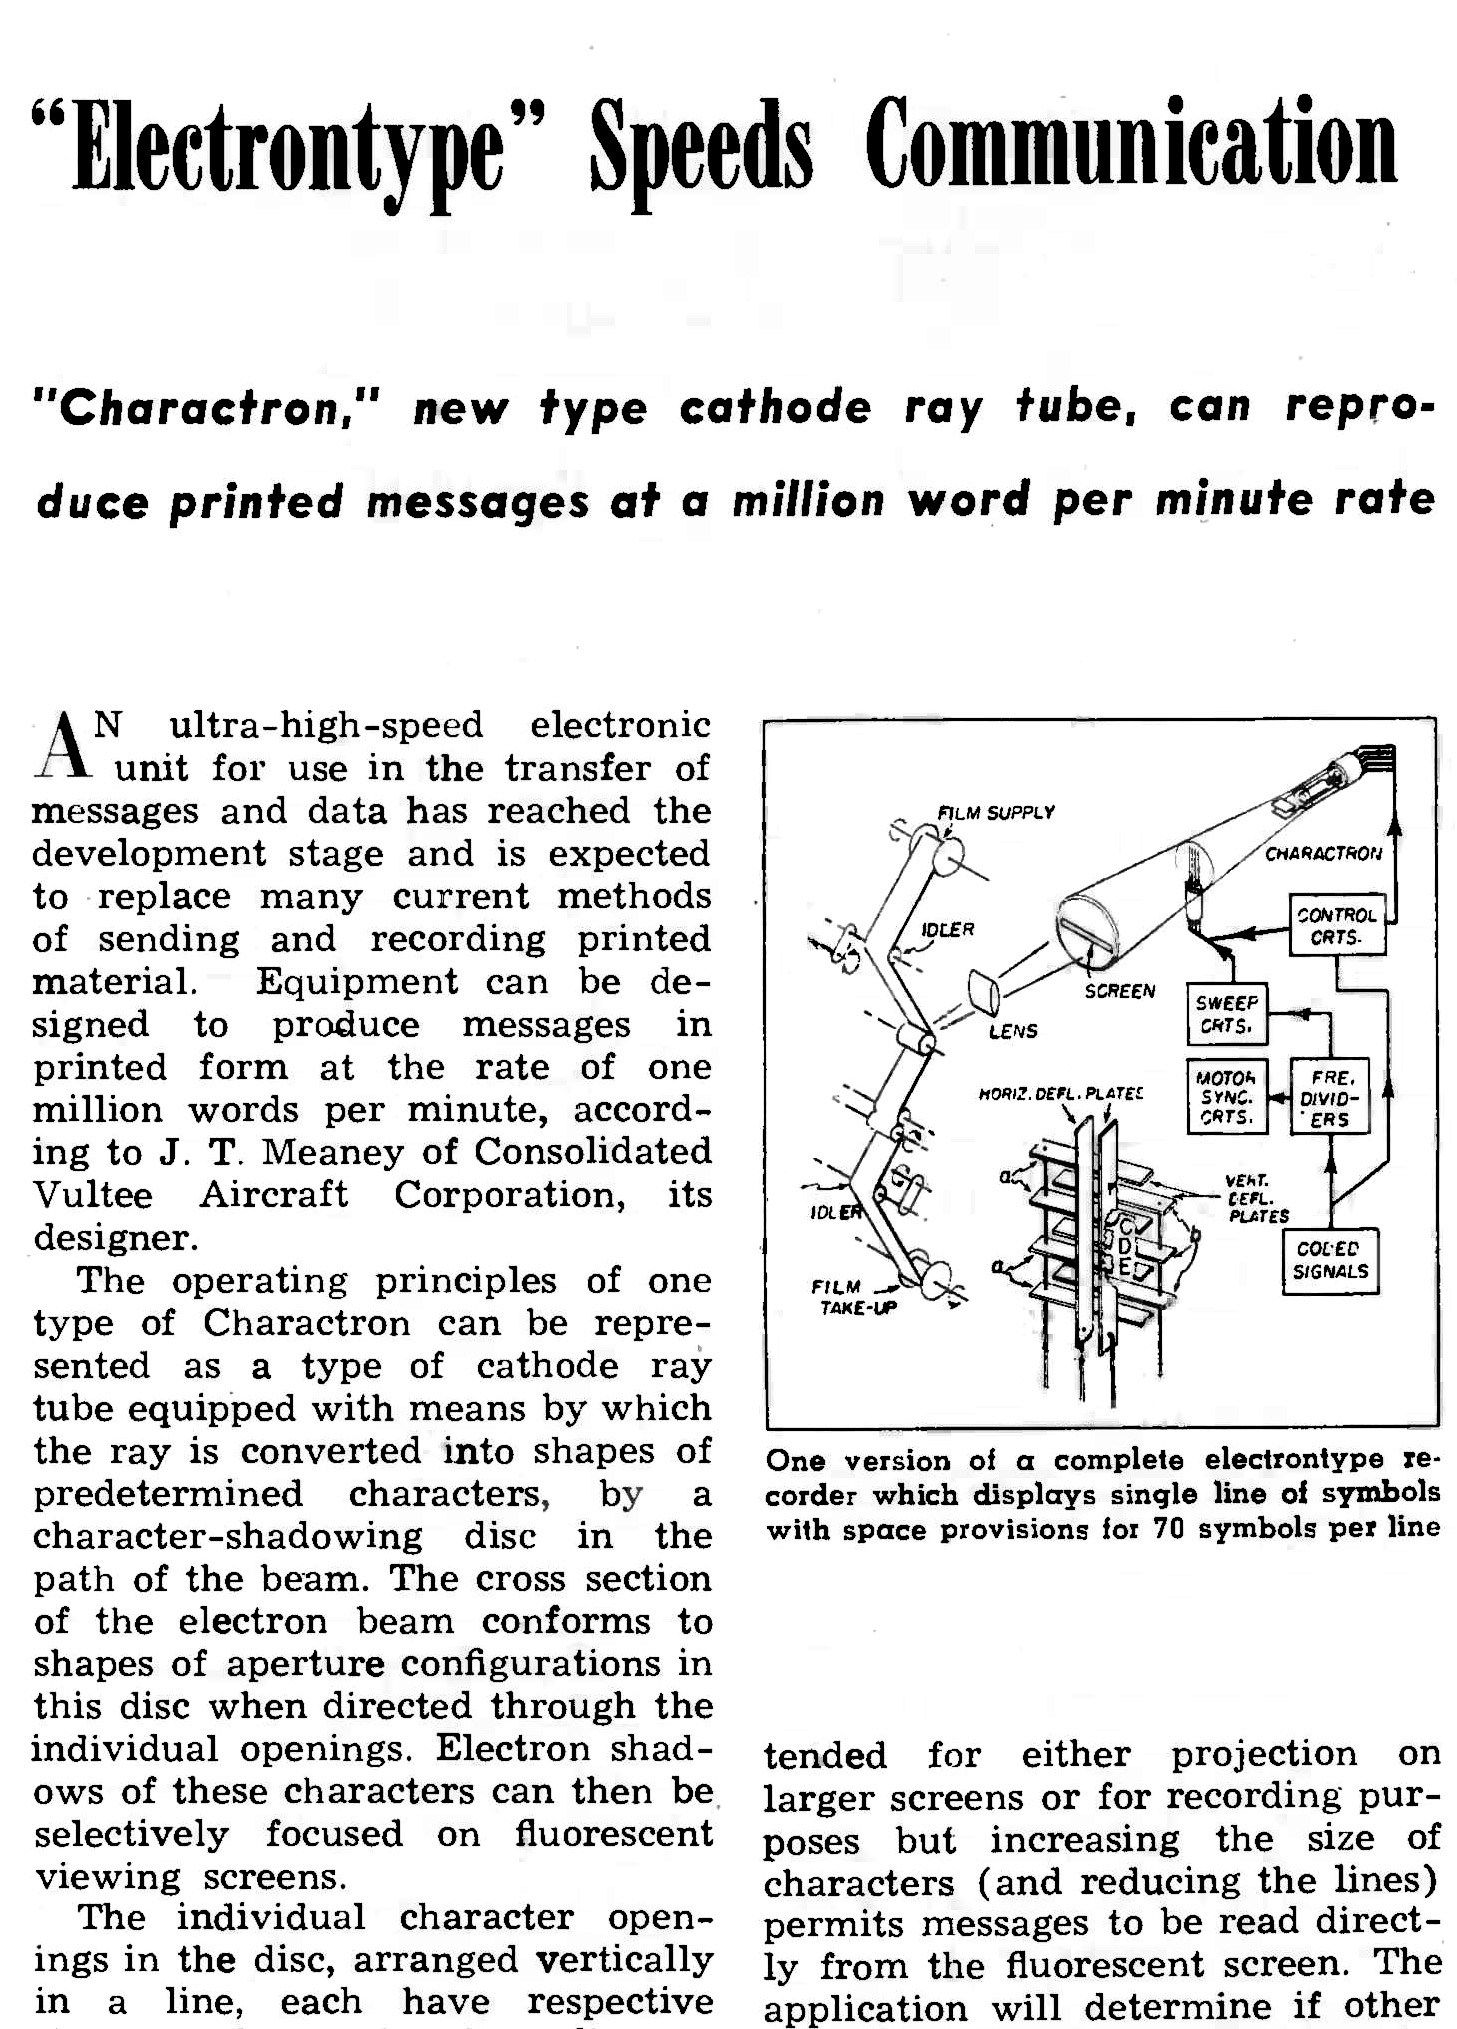 Earliest trade magazine mention of the Charactron